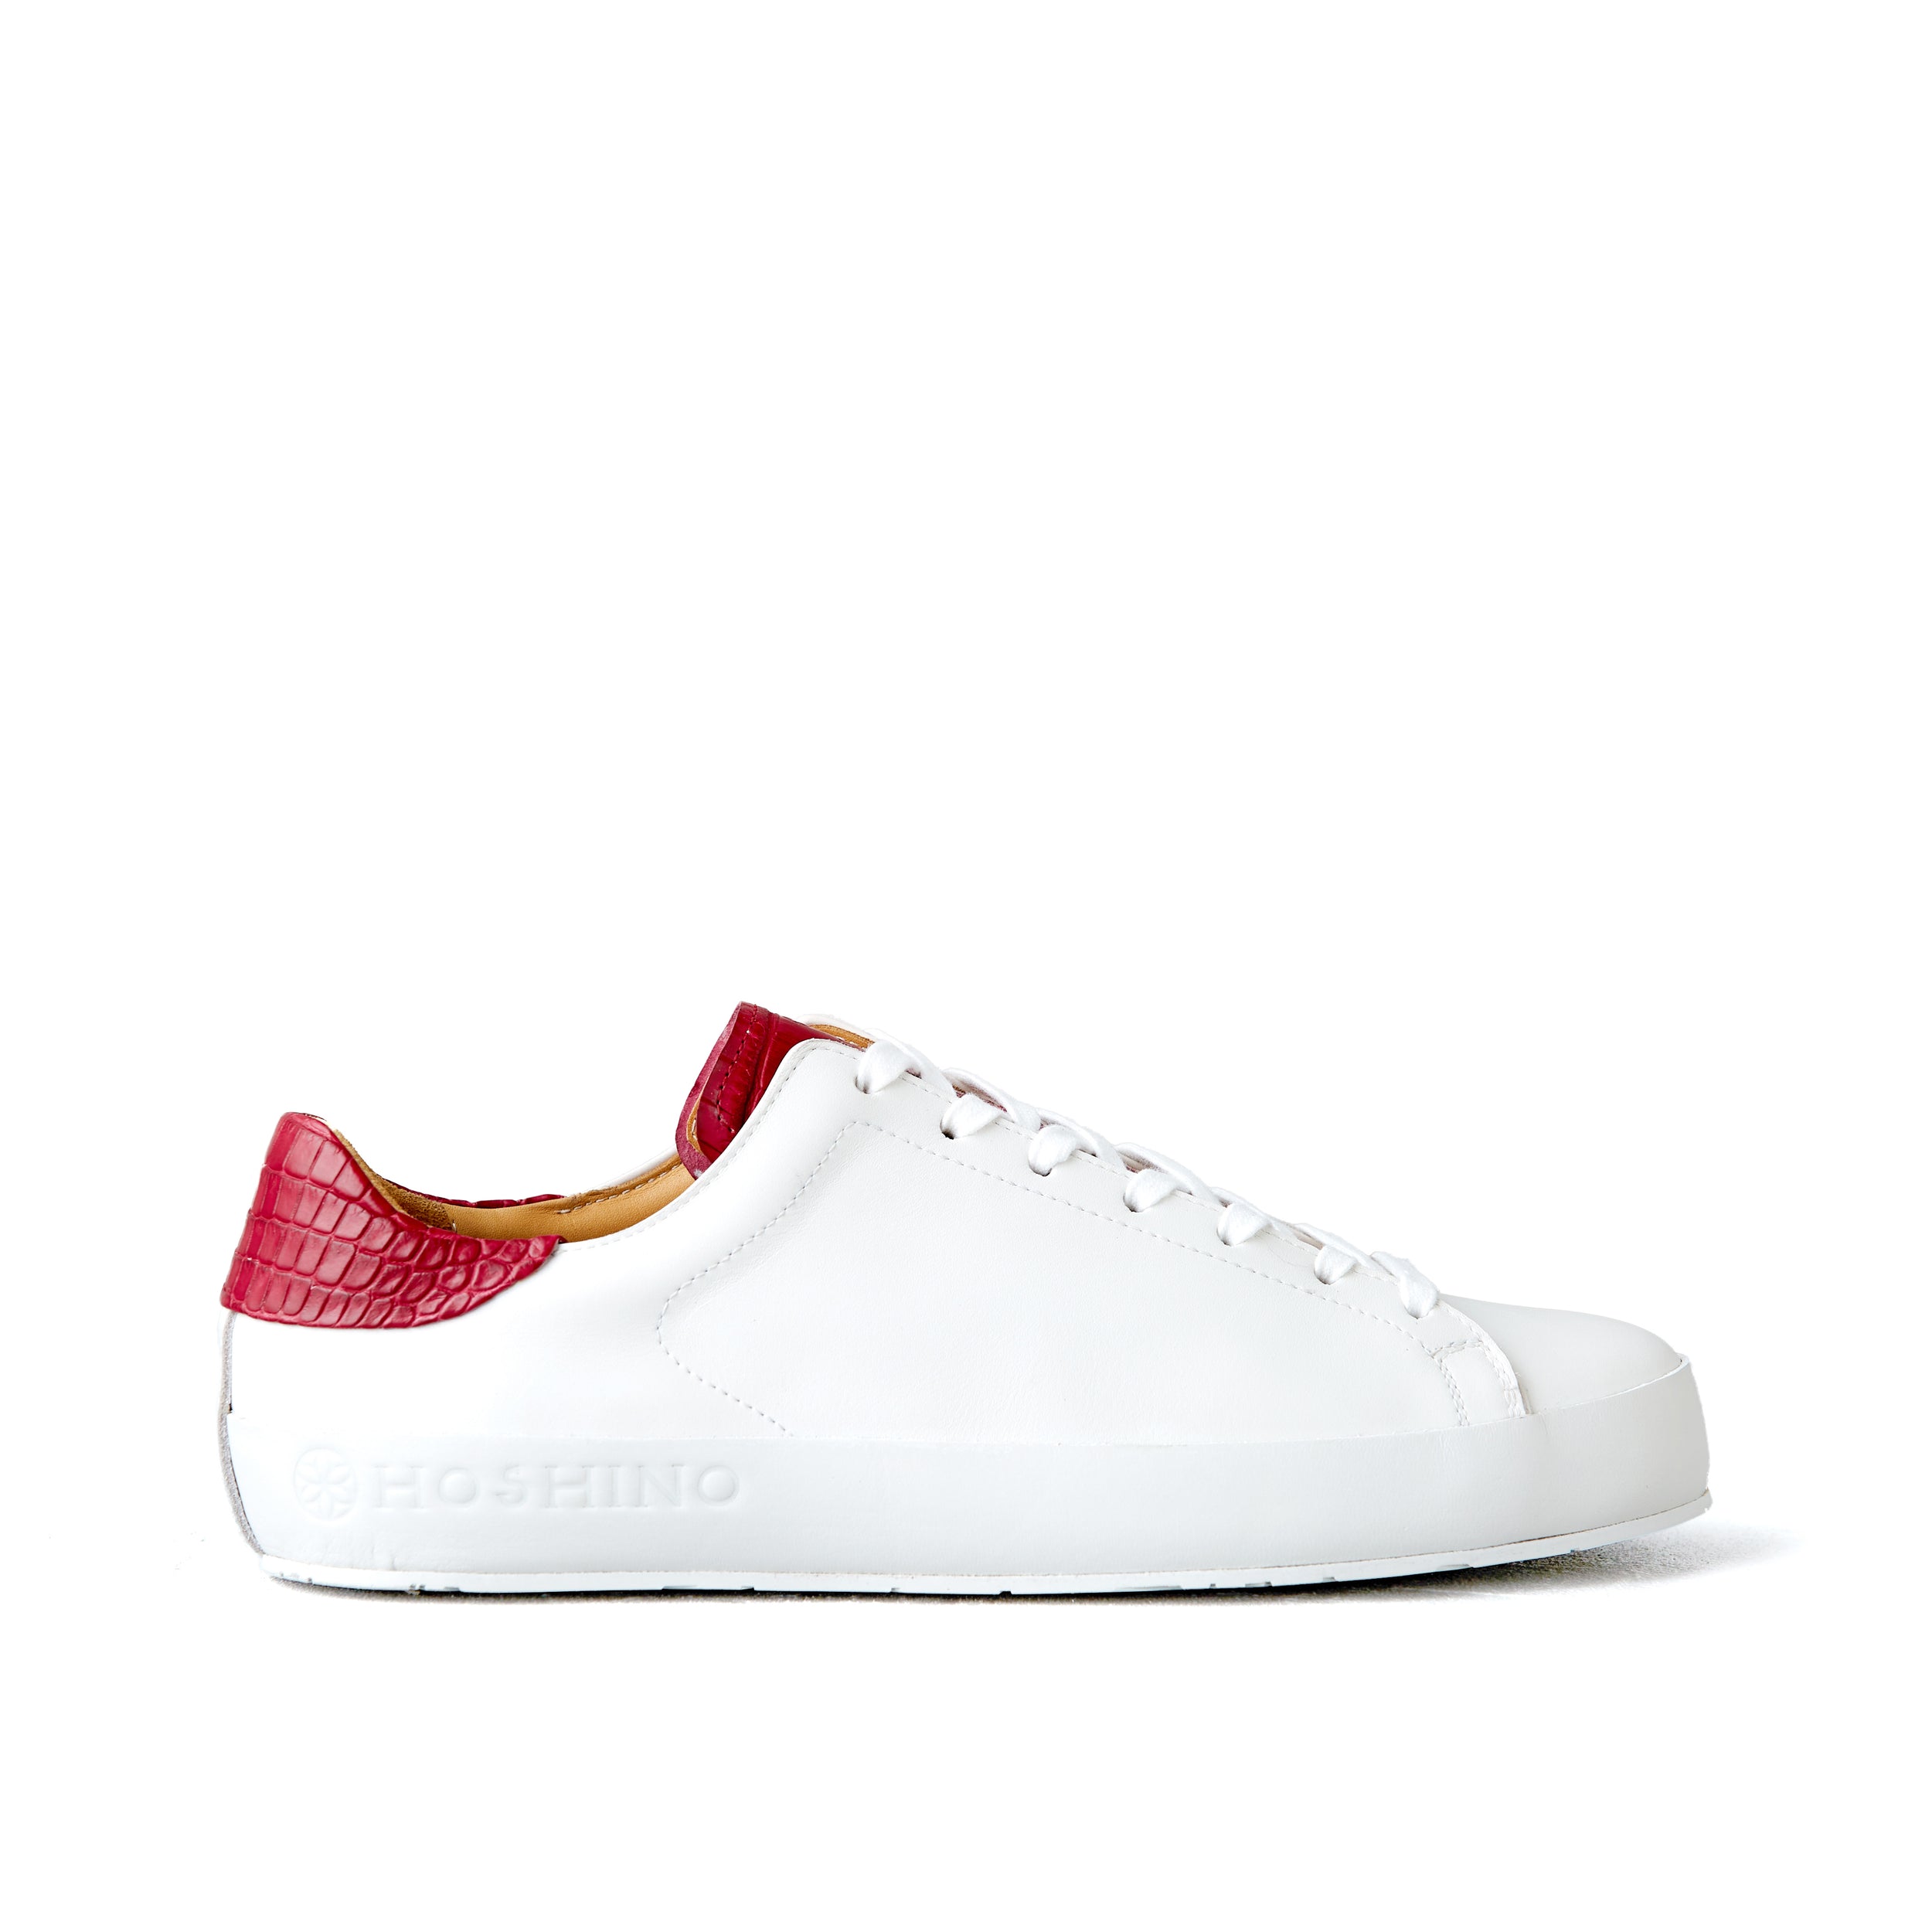 [women's] Liberte - low-top sneakers - combination tongue white and burgundy crocodile